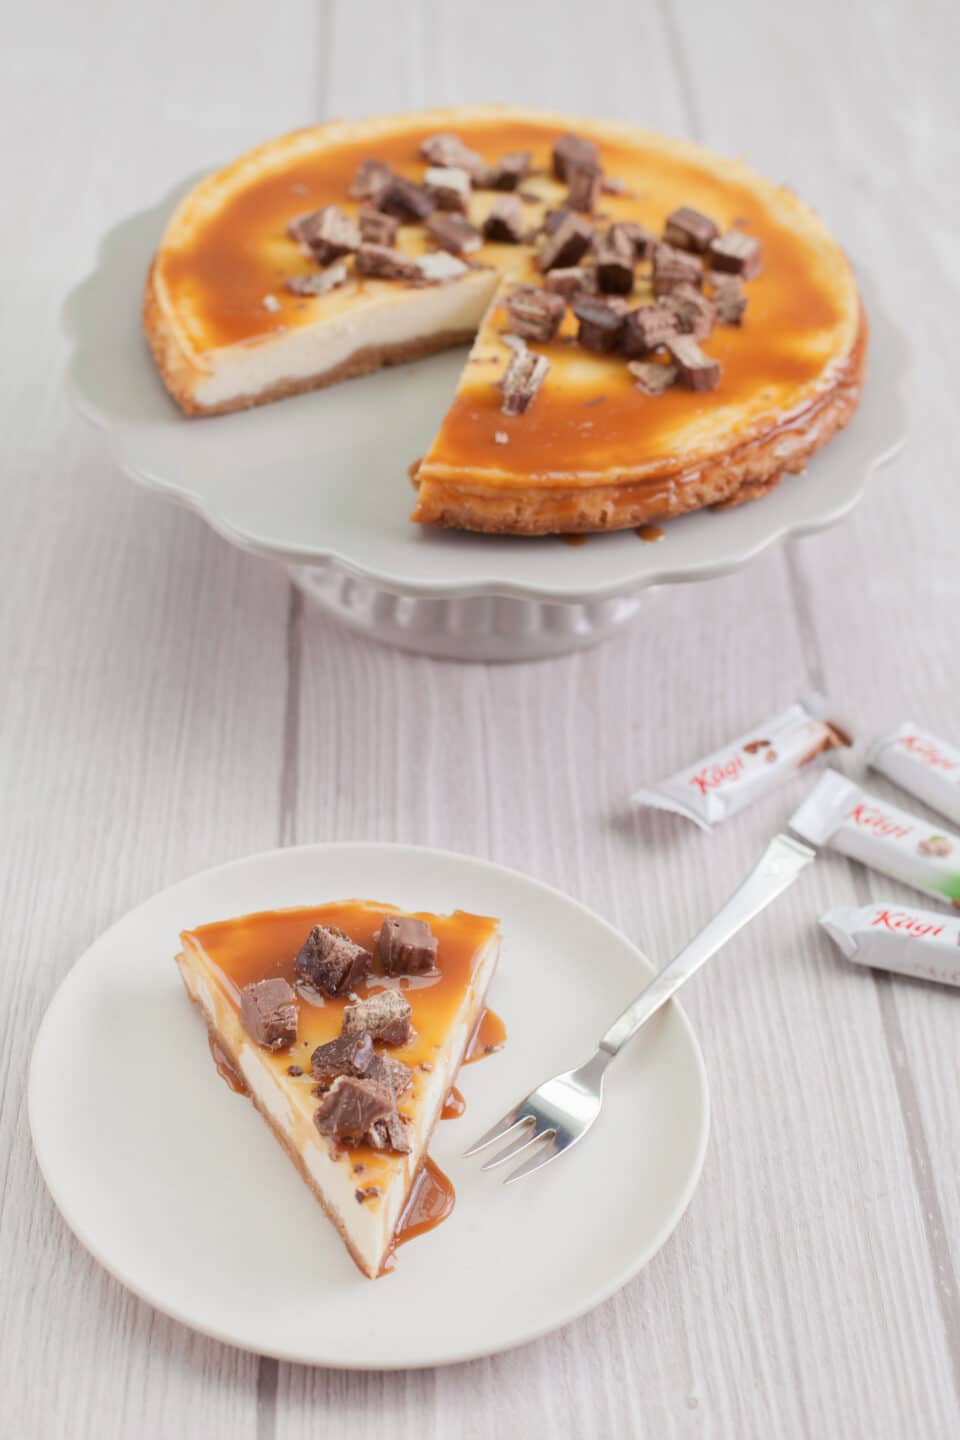 American Cheesecake with Caramel Topping